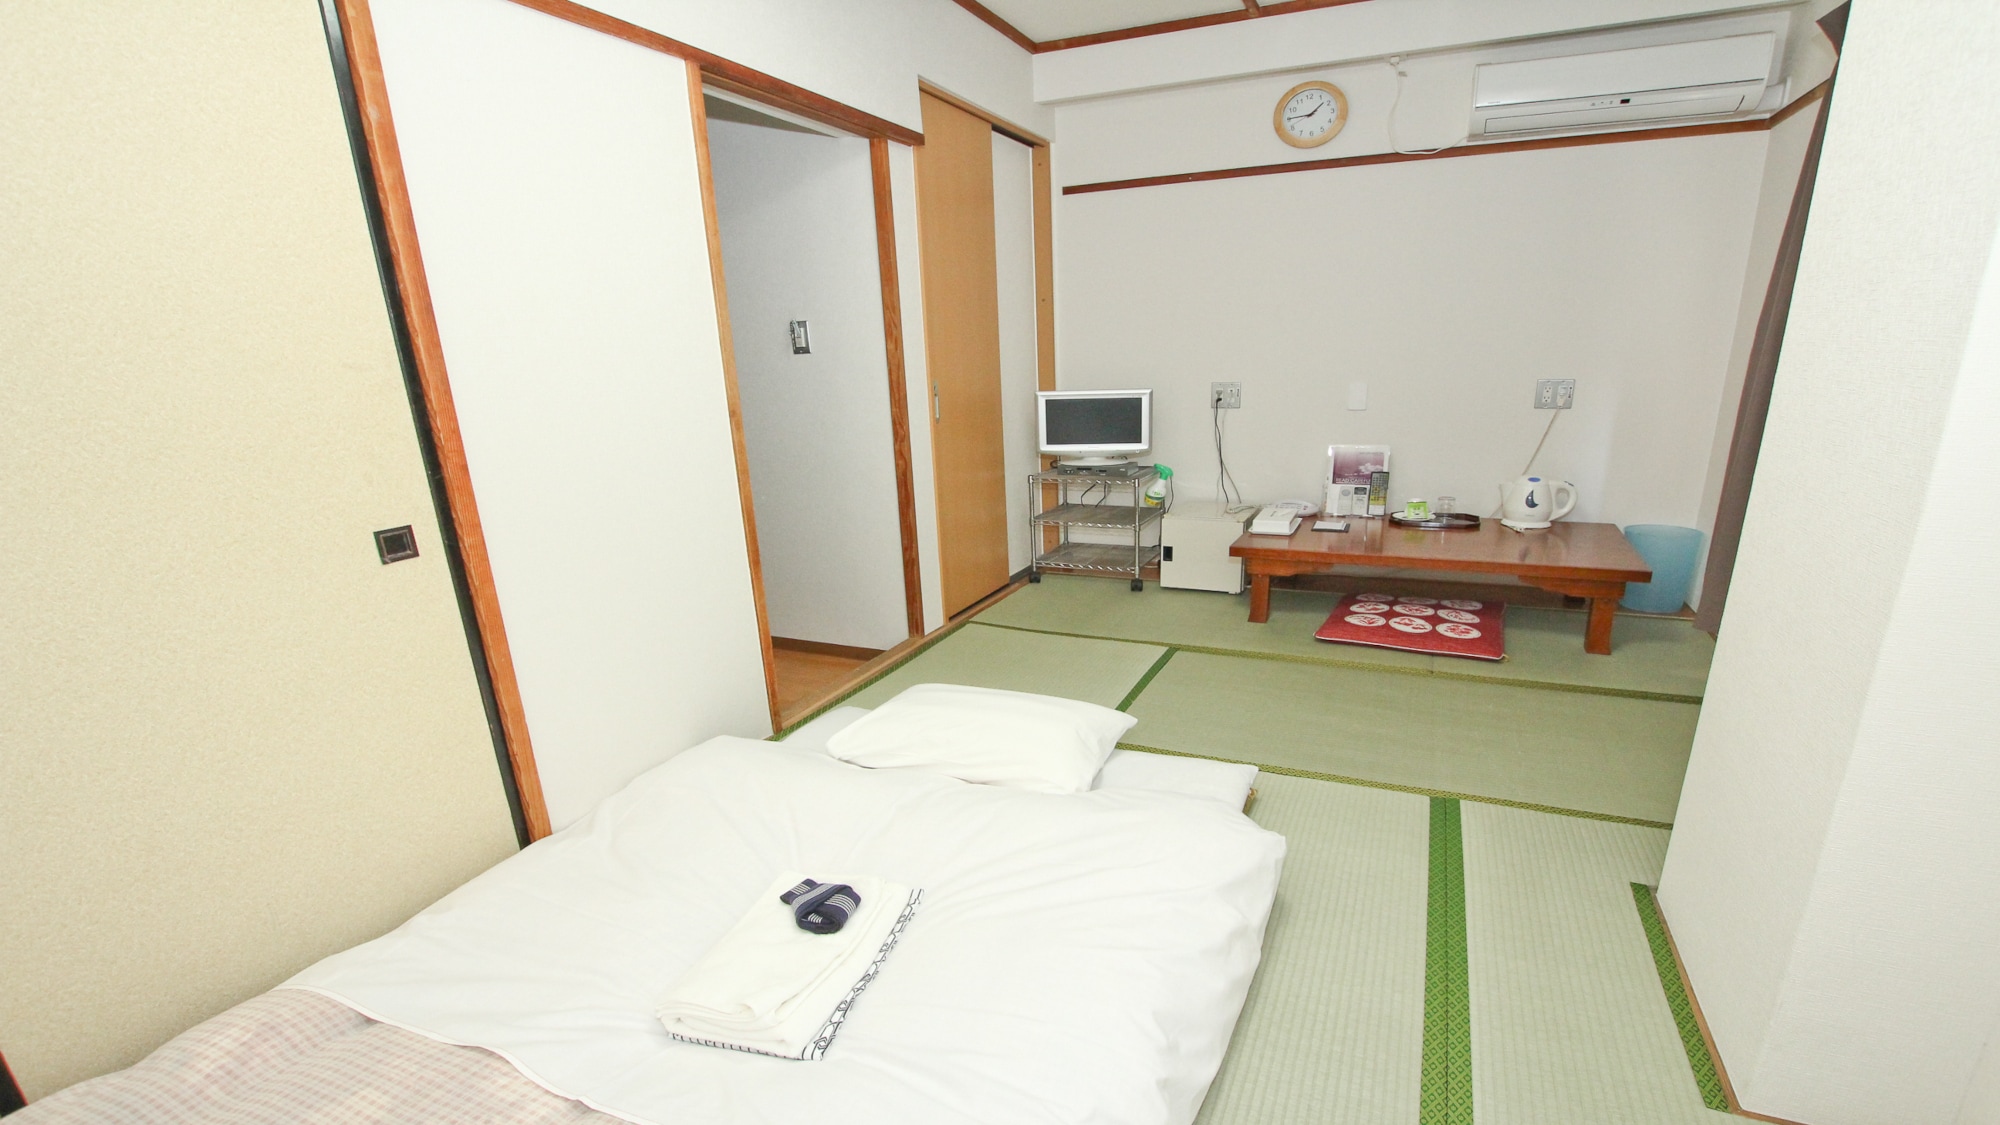 An example of a Japanese-style room (without bath and with toilet)